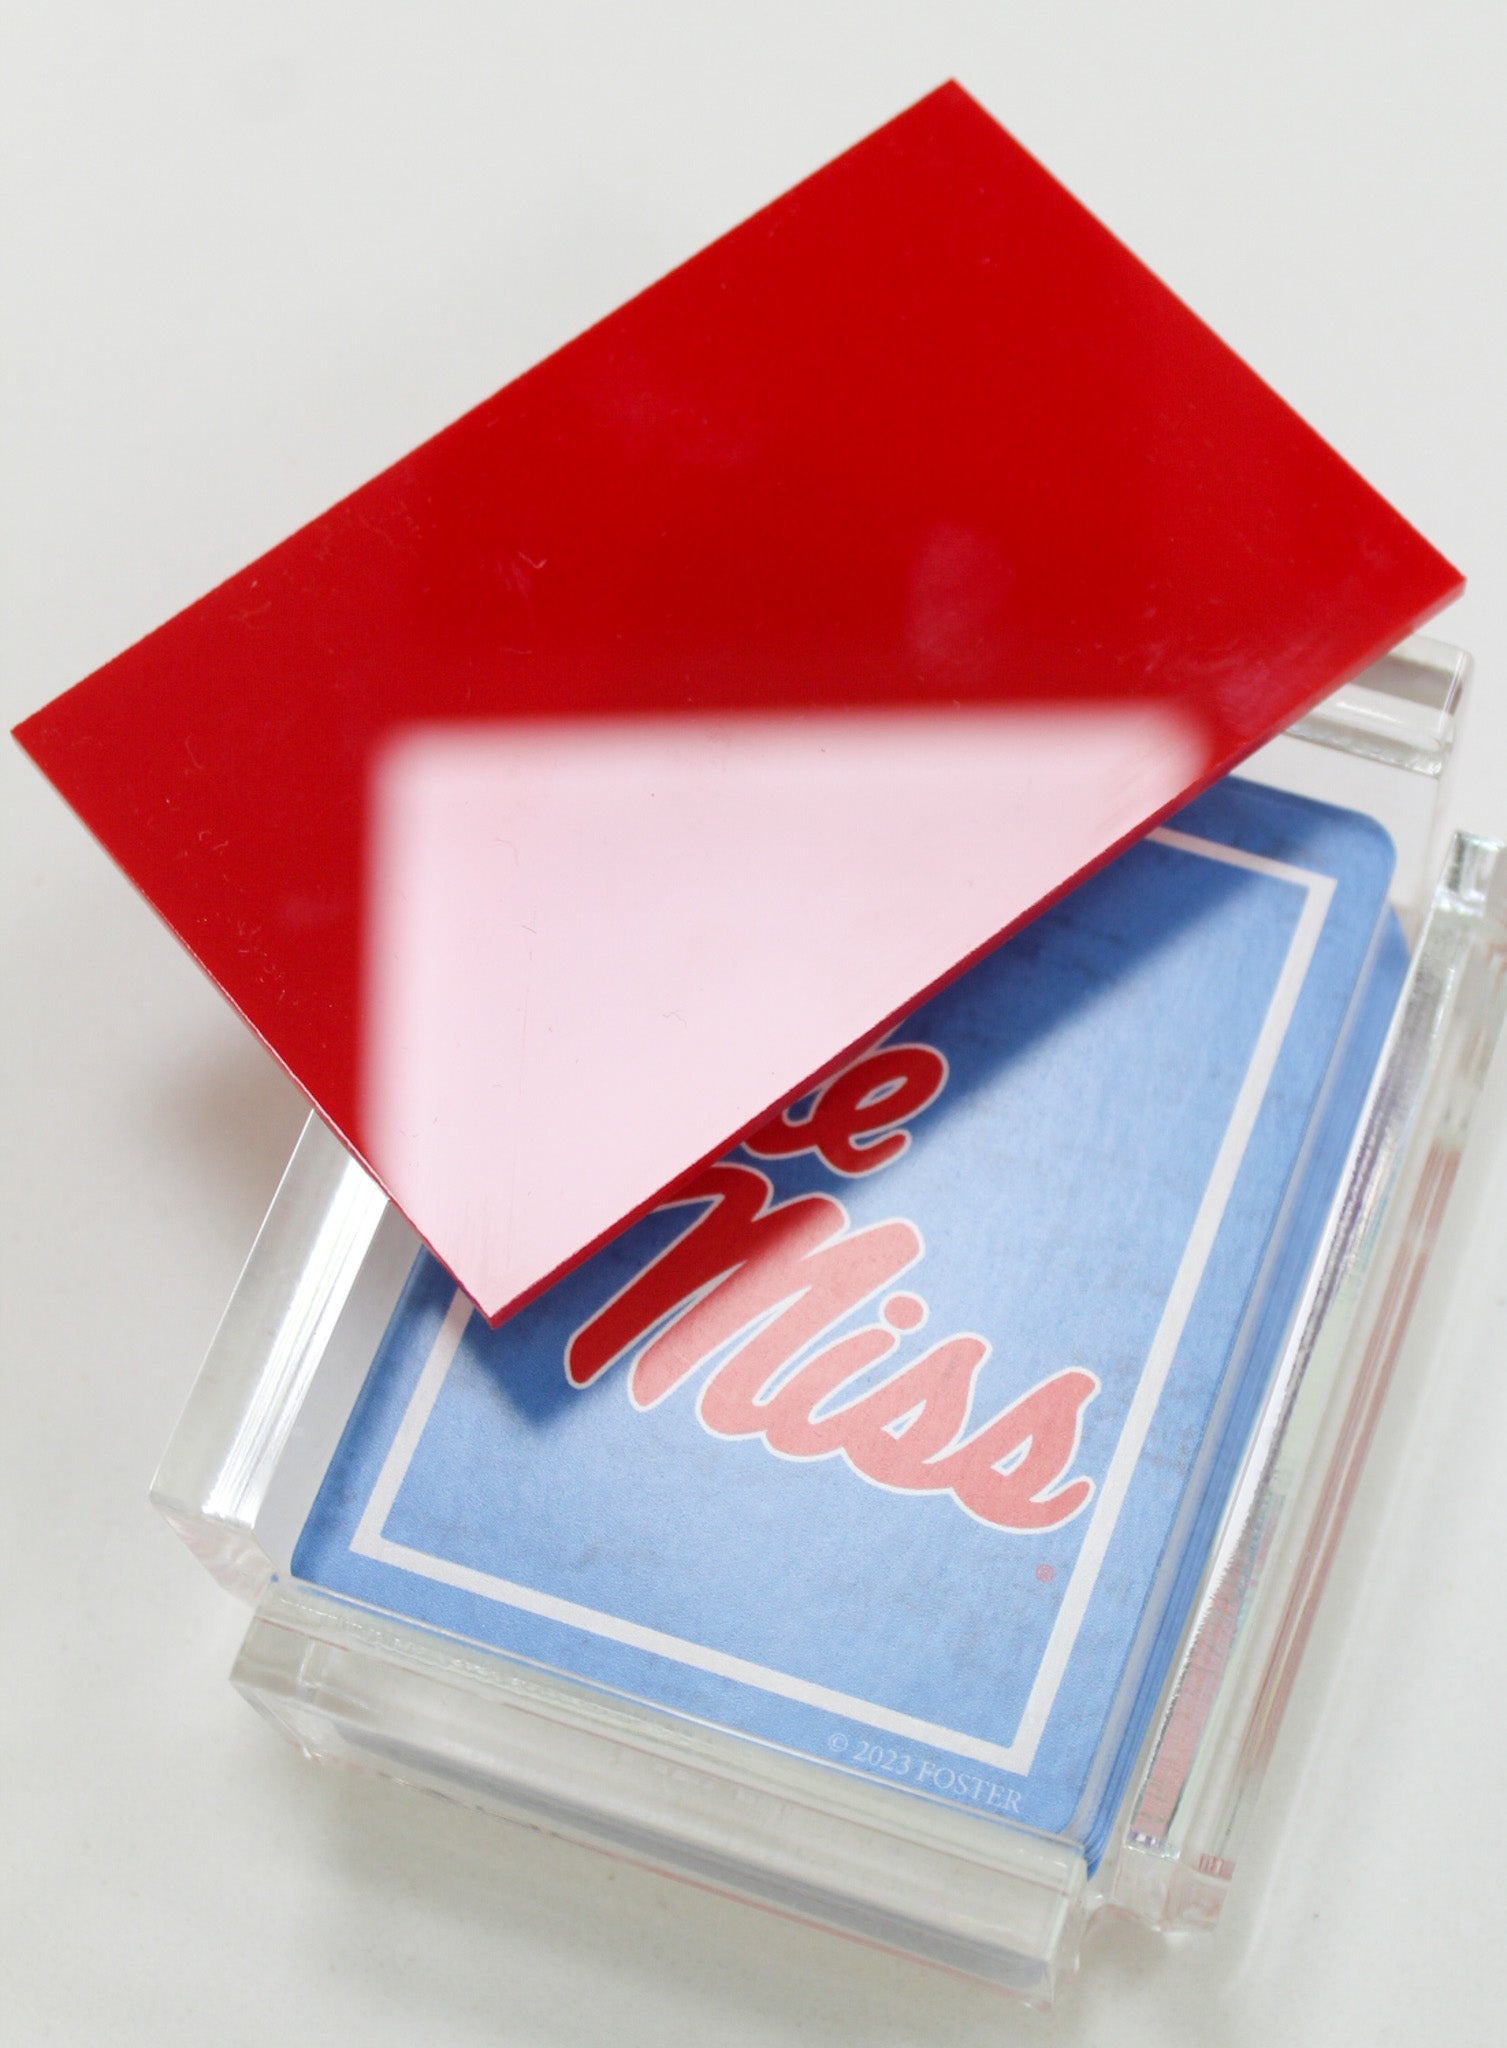 red acrylic playing card case from FOSTER with Ole Miss playing cards